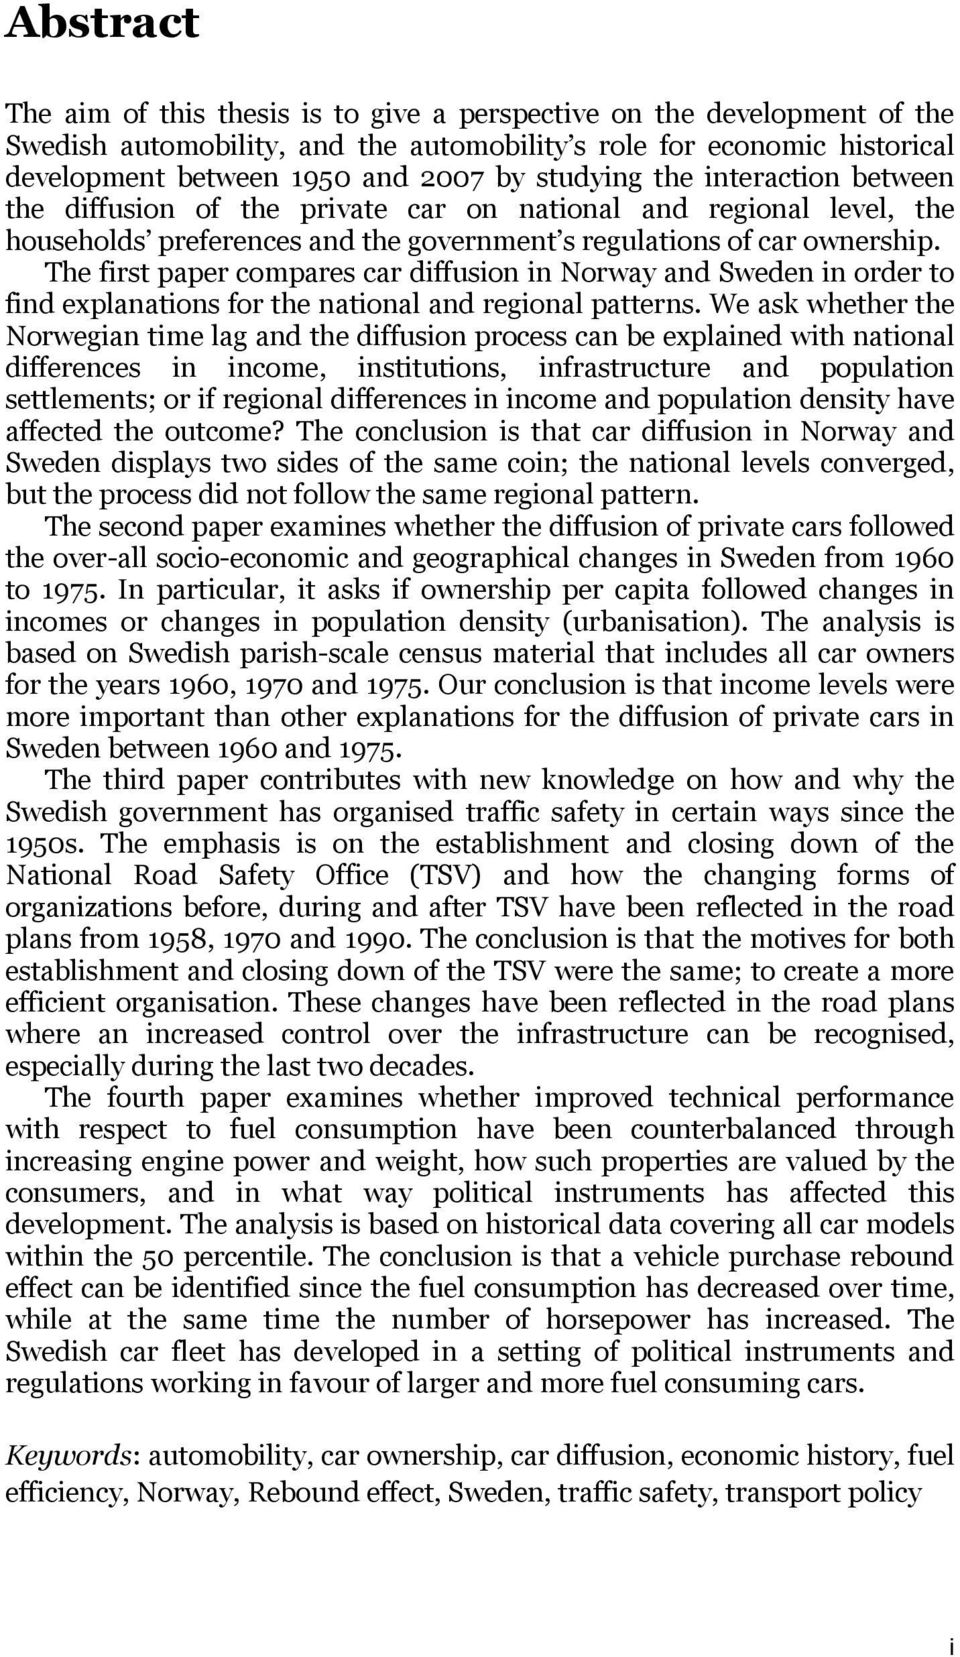 The first paper compares car diffusion in Norway and Sweden in order to find explanations for the national and regional patterns.